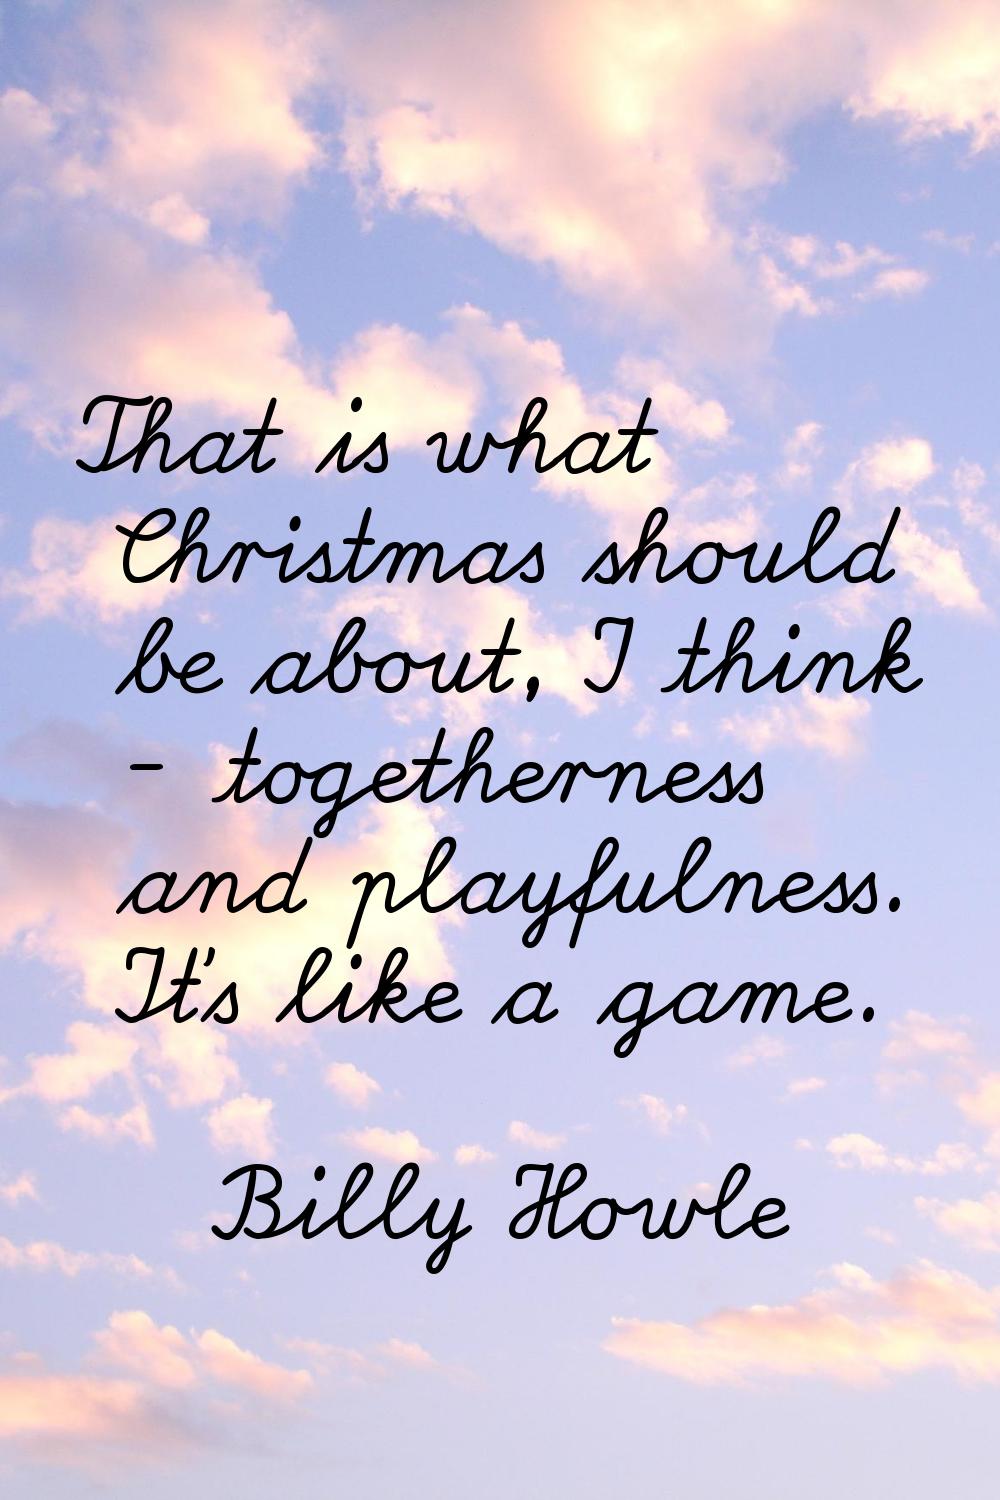 That is what Christmas should be about, I think - togetherness and playfulness. It's like a game.